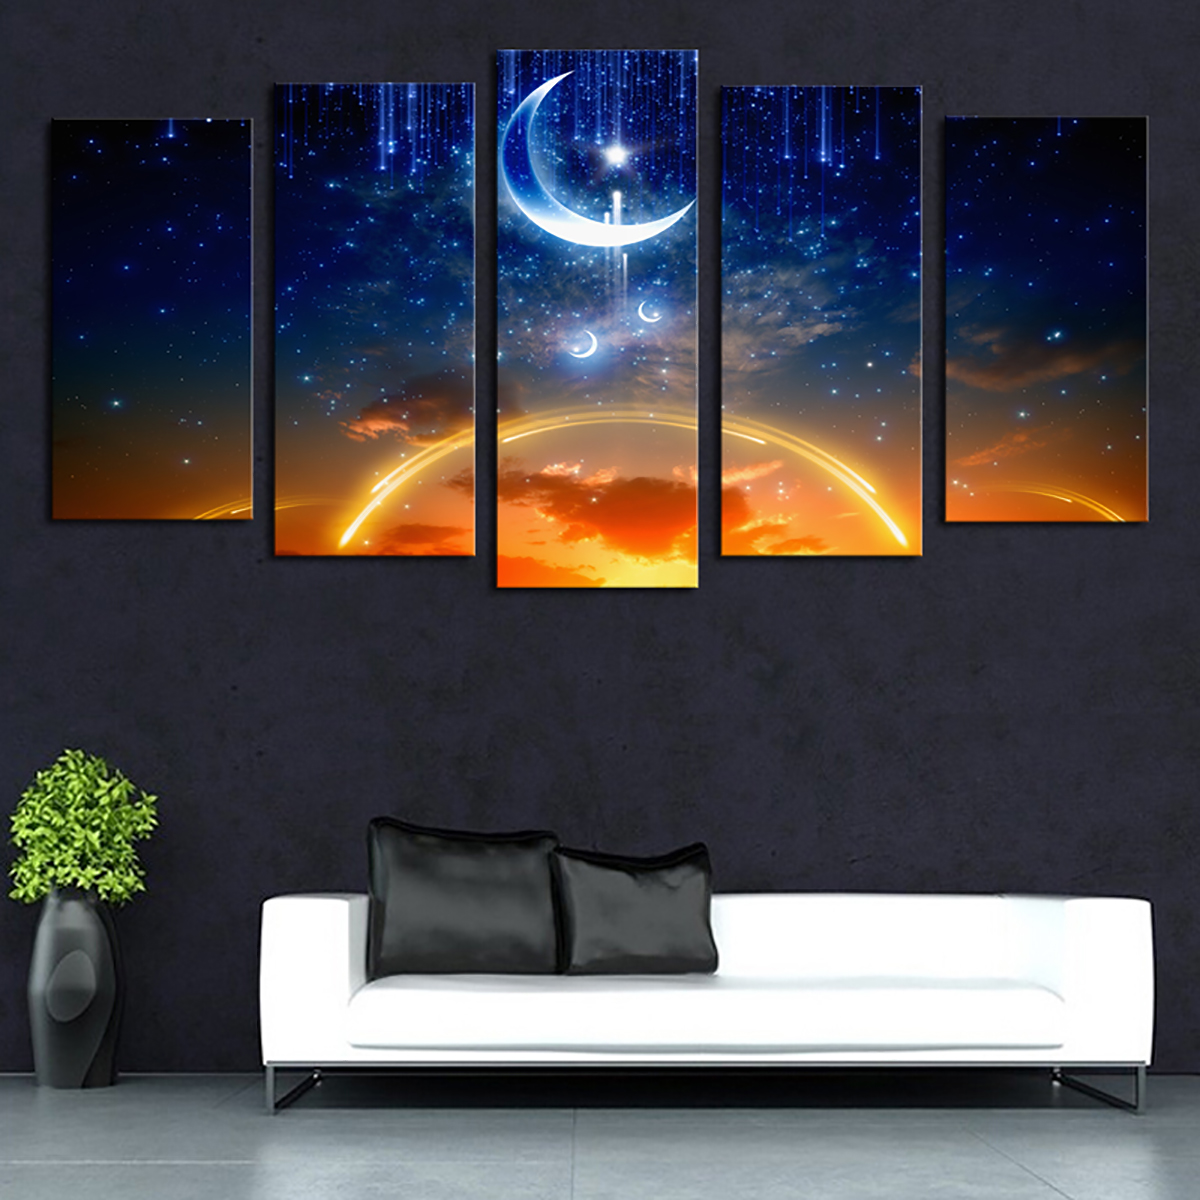 5Pcs-Canvas-Print-Paintings-Scenery-Oil-Painting-Wall-Decorative-Printing-Art-Picture-Frameless-Home-1758668-14